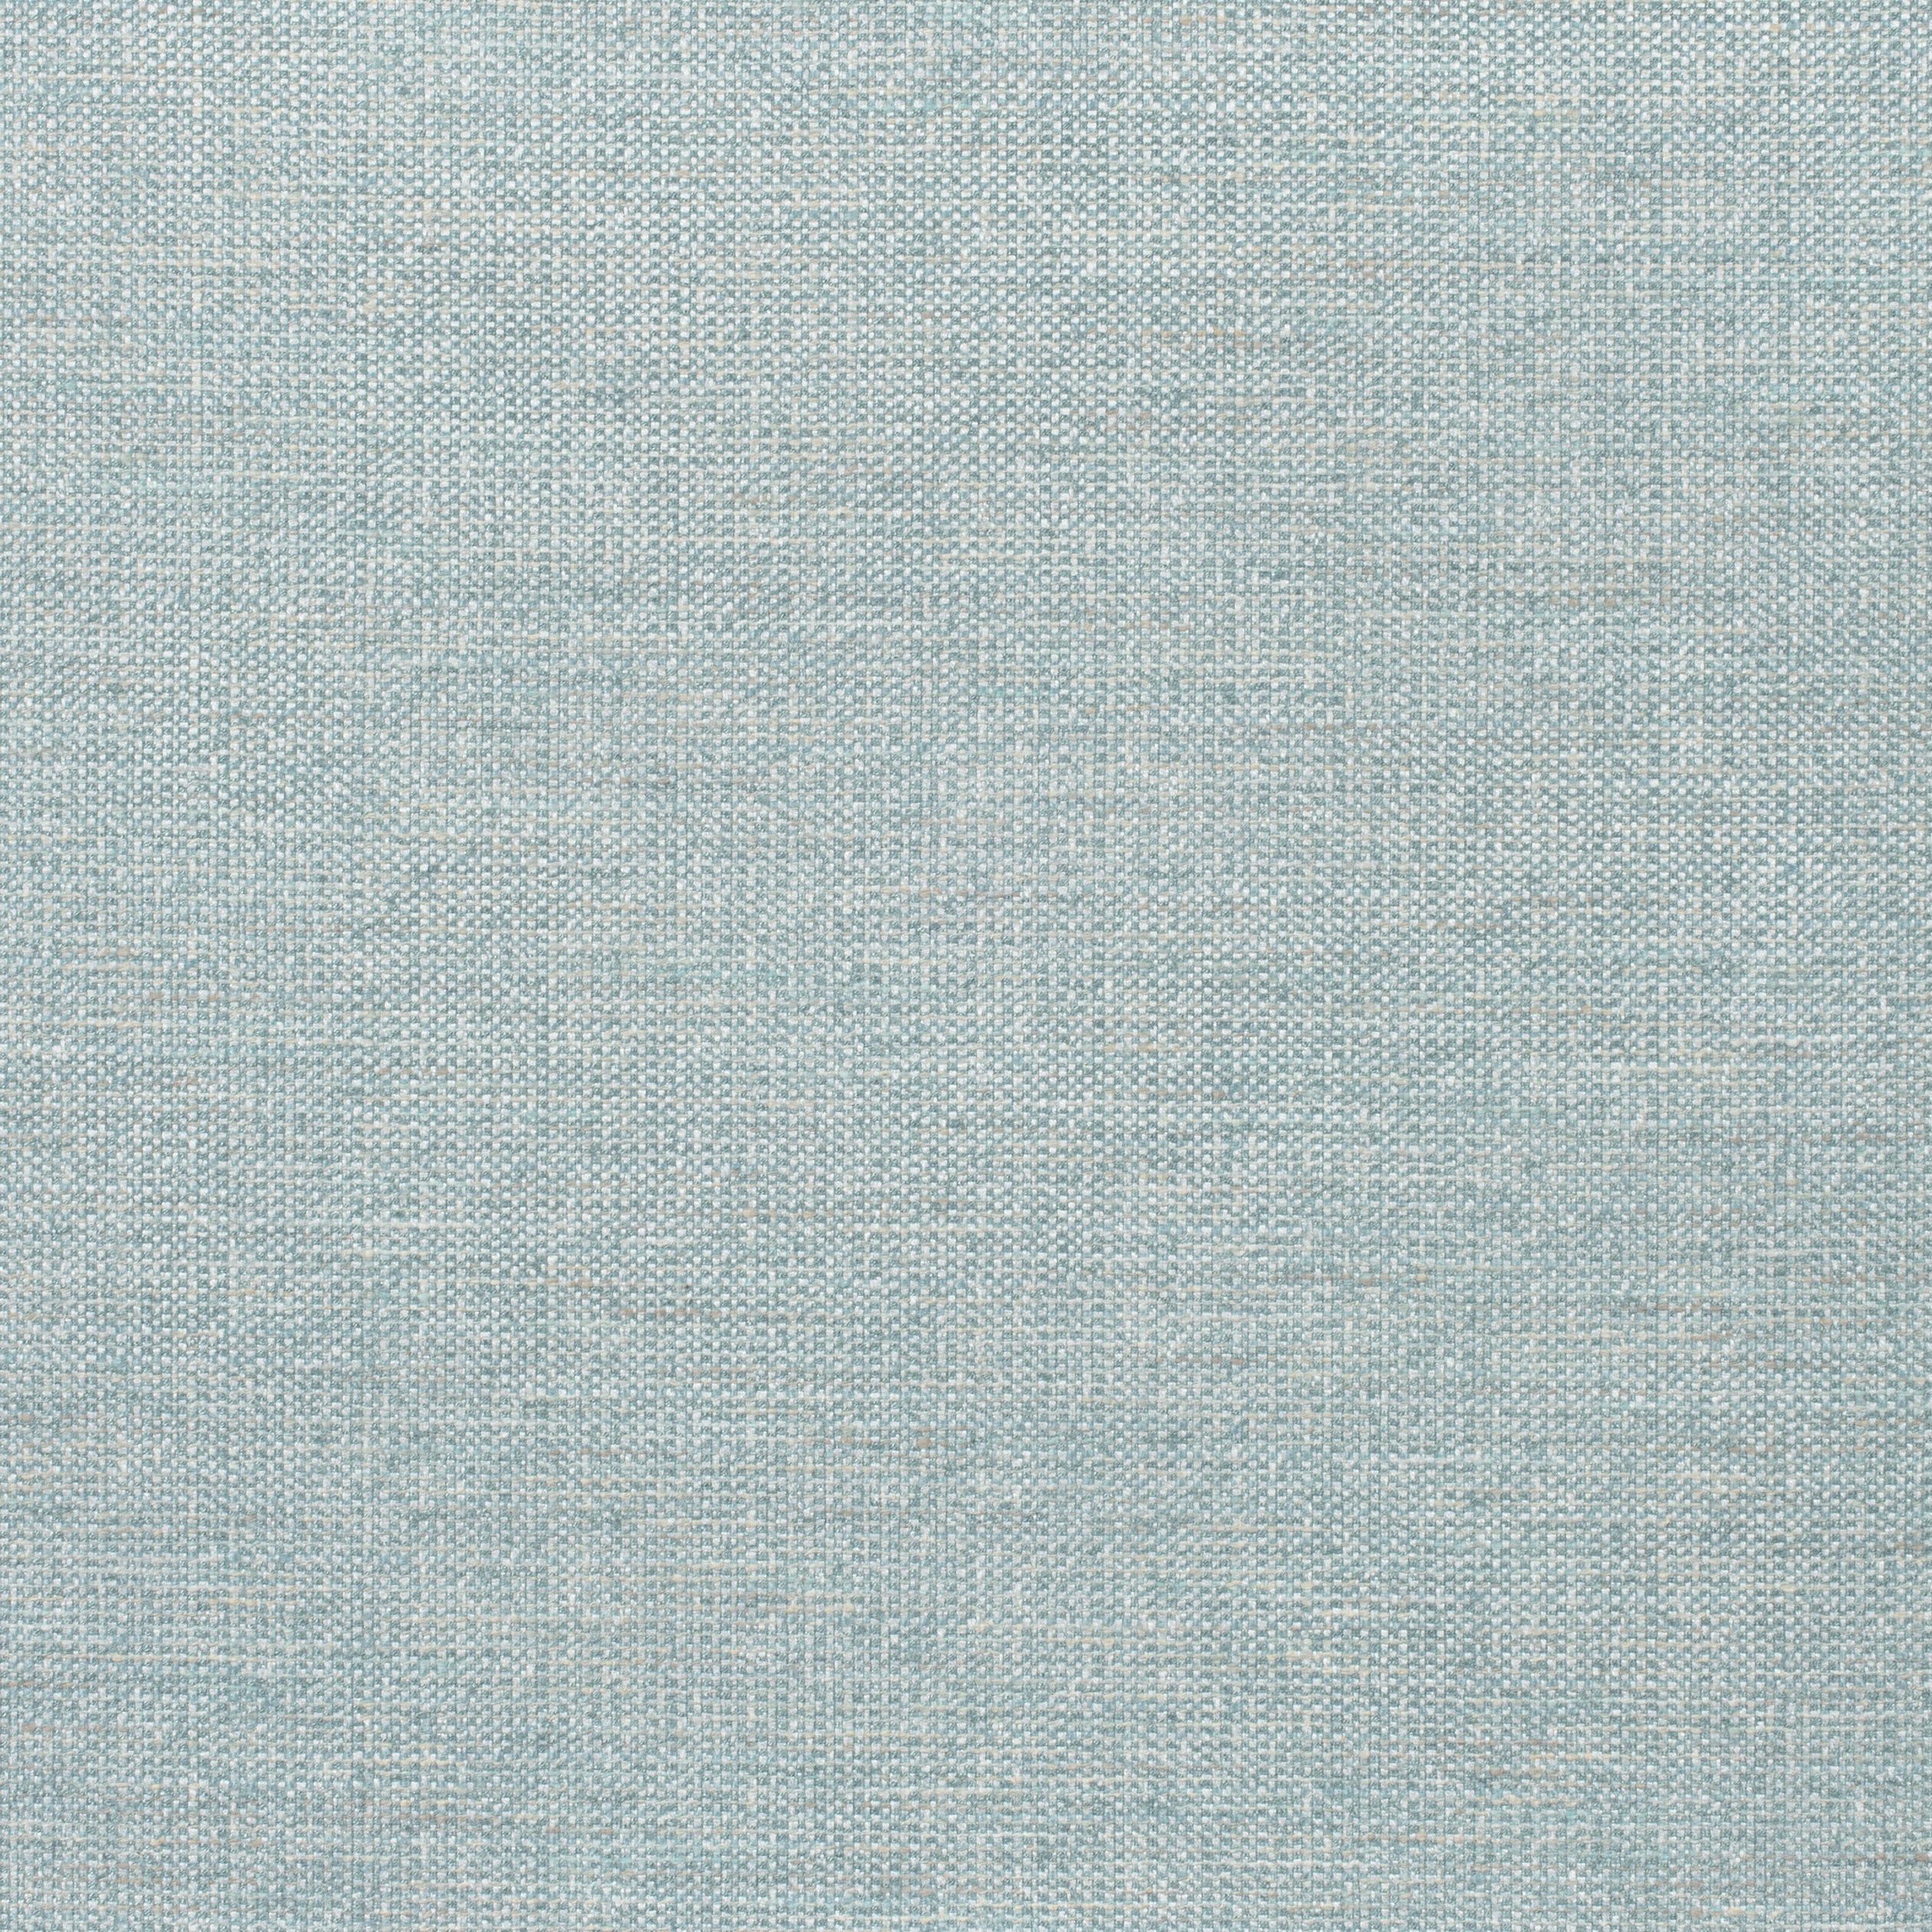 Dante fabric in aqua color - pattern number W80698 - by Thibaut in the Woven Resource 11: Rialto collection